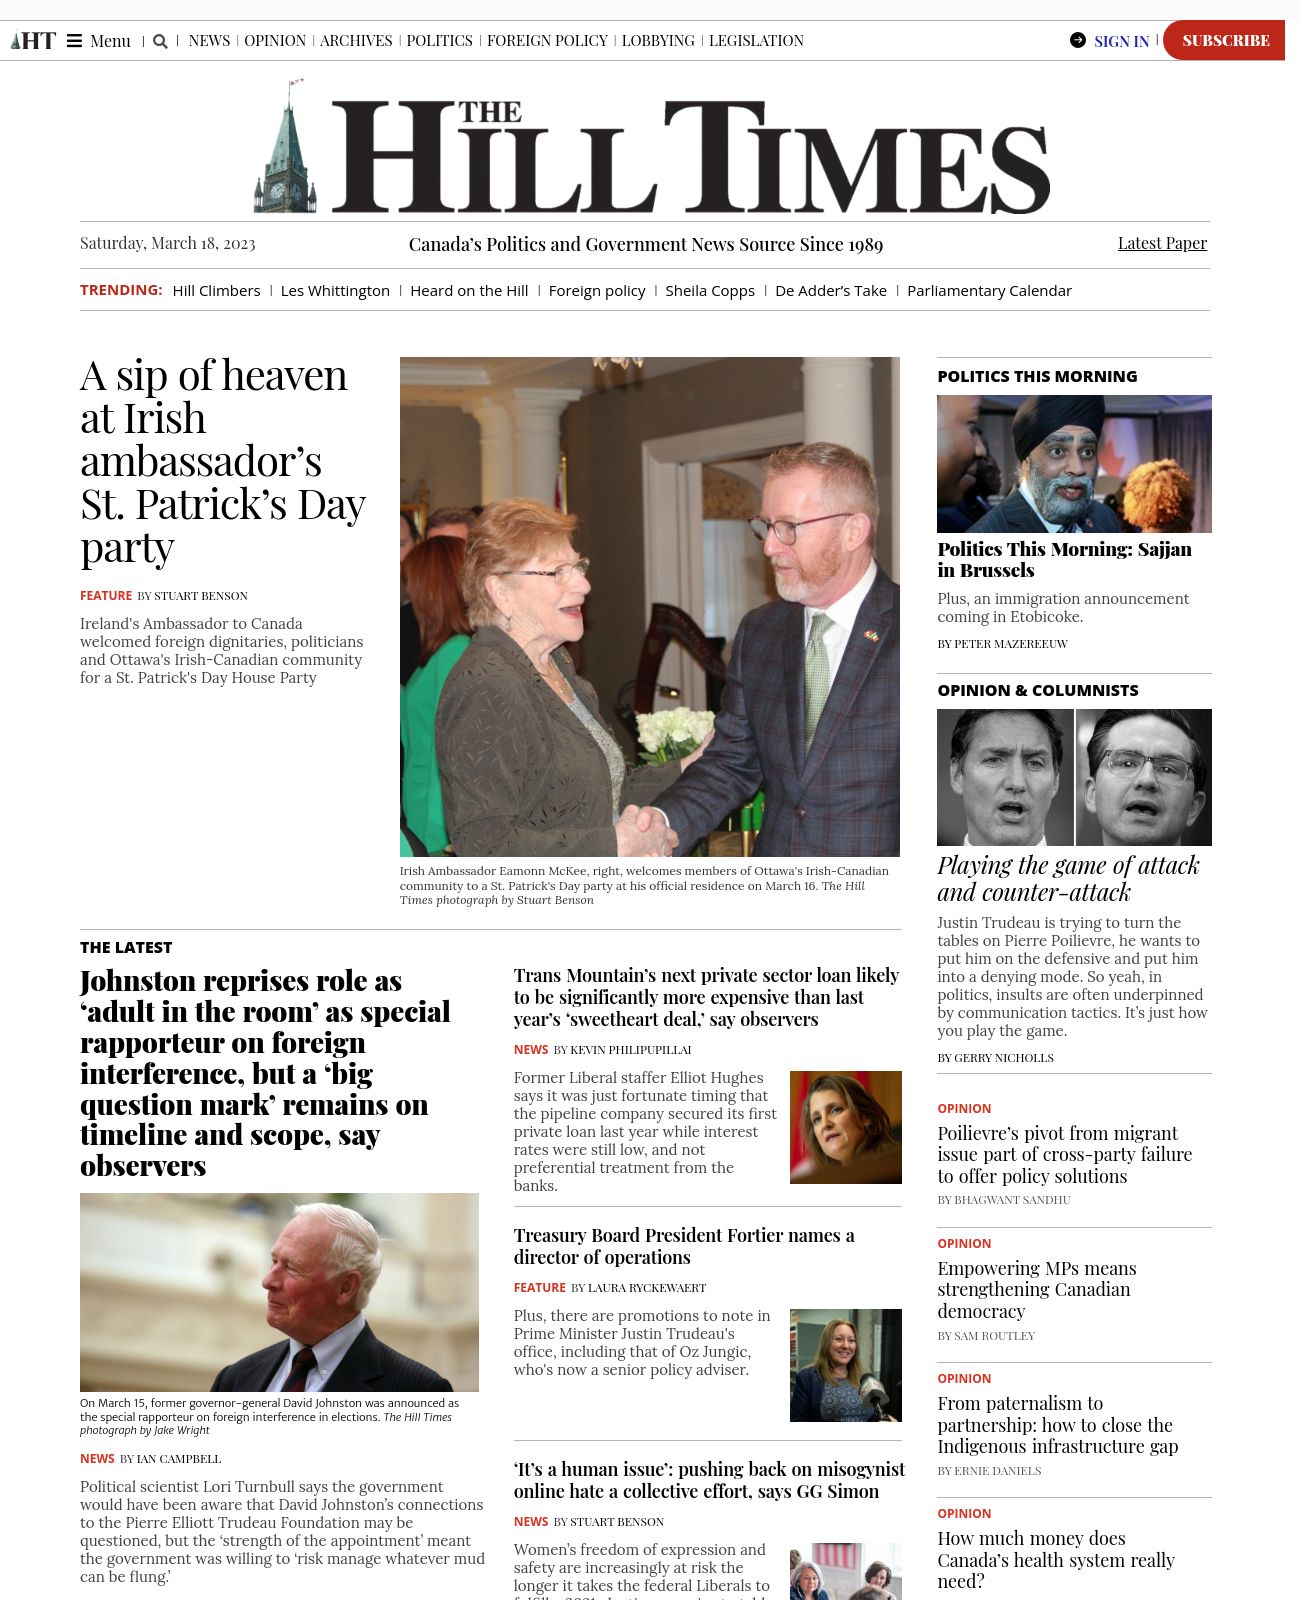 The Hill Times at 2023-03-18 10:43:06-04:00 local time